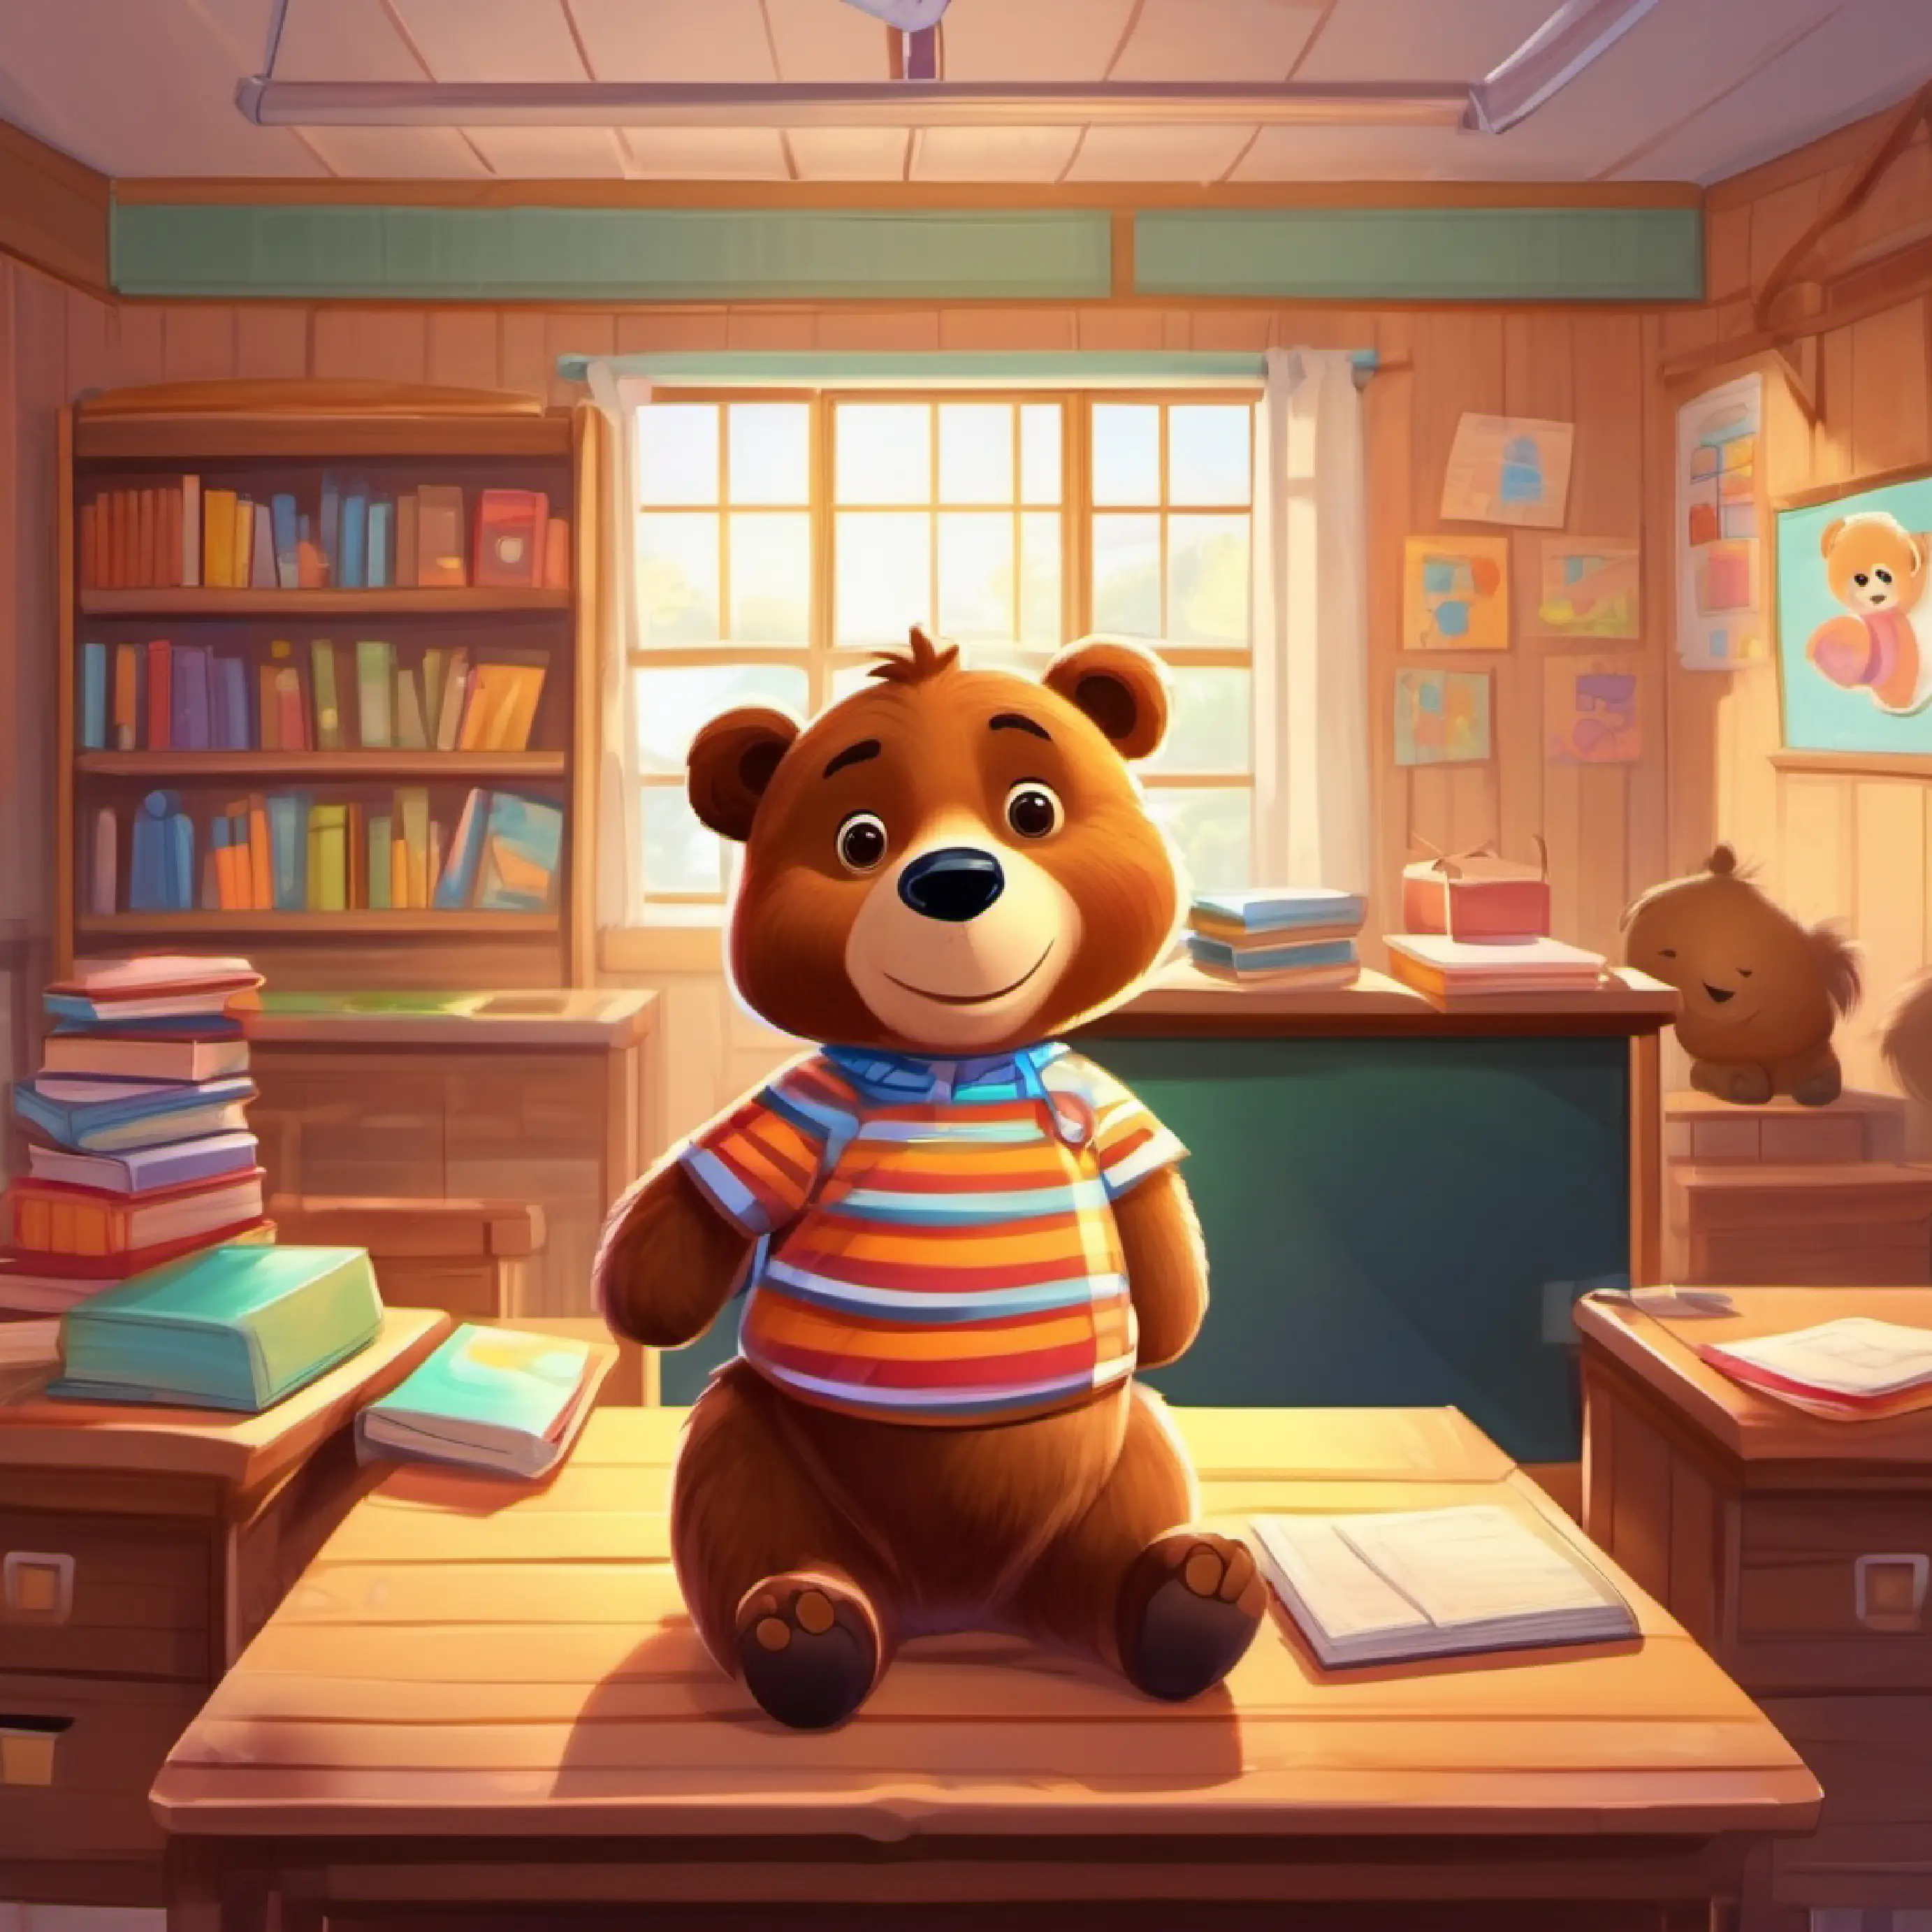 Introduction to Brown bear with a bright smile and a striped shirt, brown eyes and the diverse classroom setting.